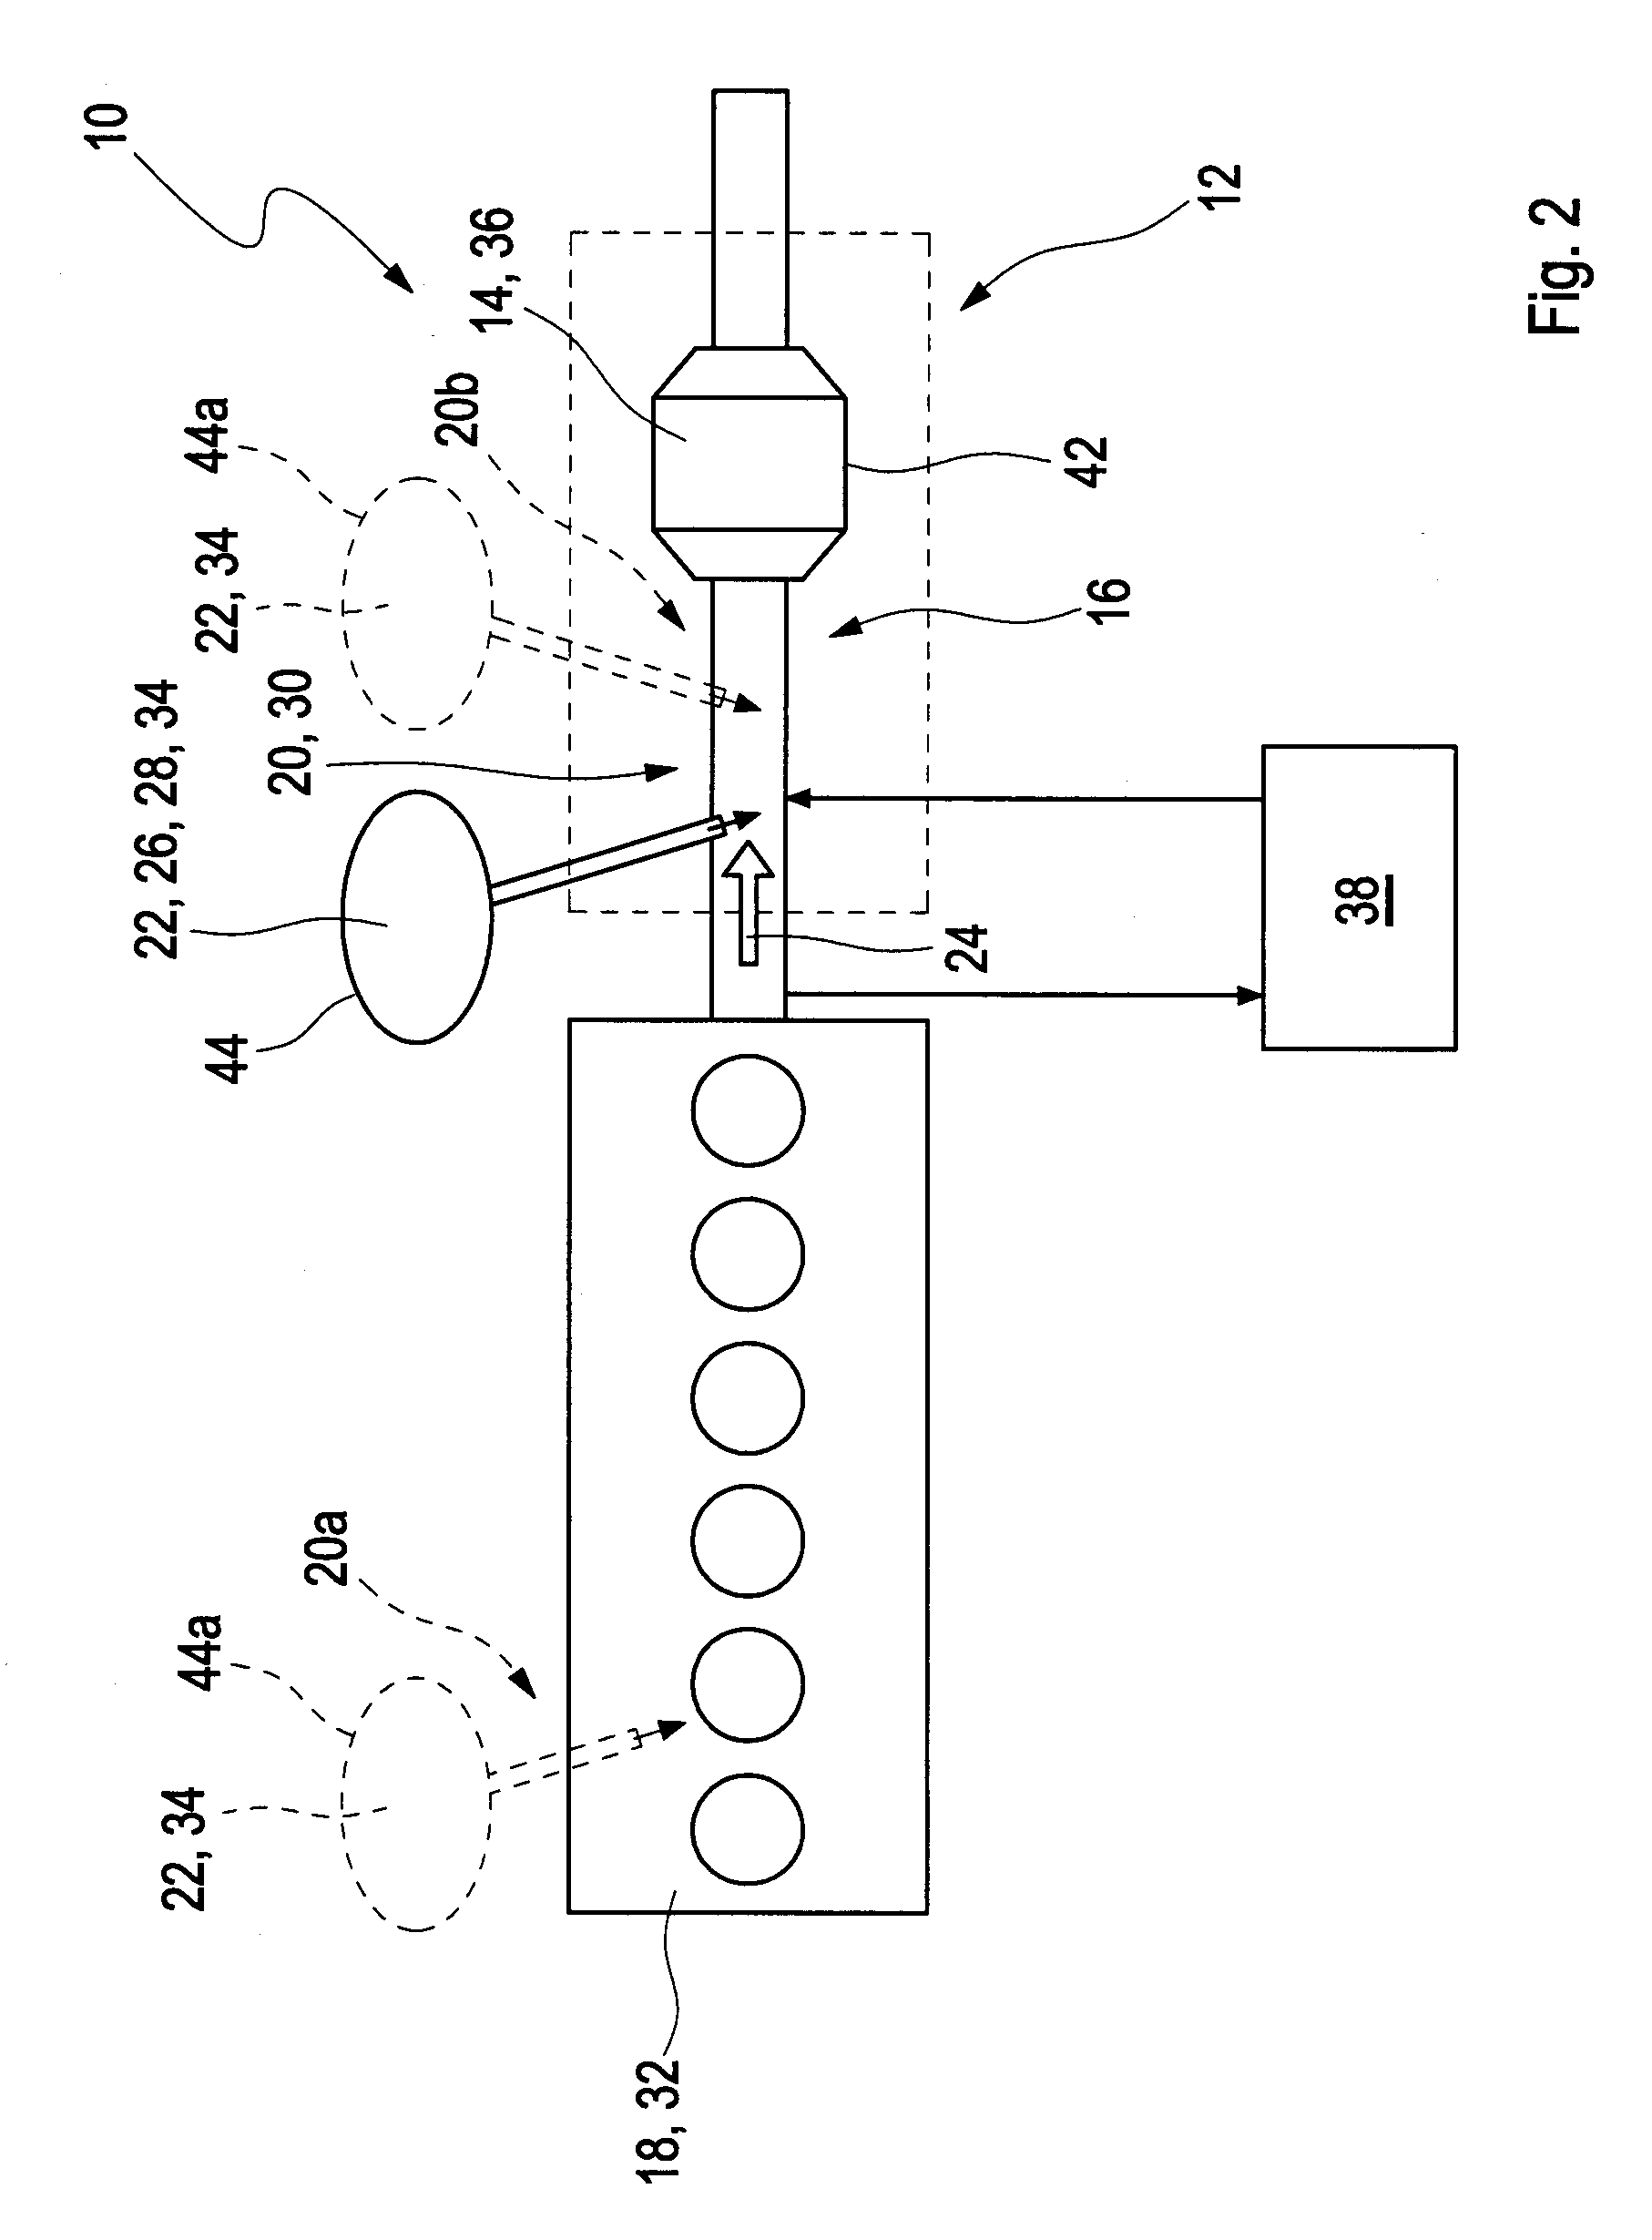 Exhaust aftertreatment system where an activator material is added to the reductant fed to the catalytic converter